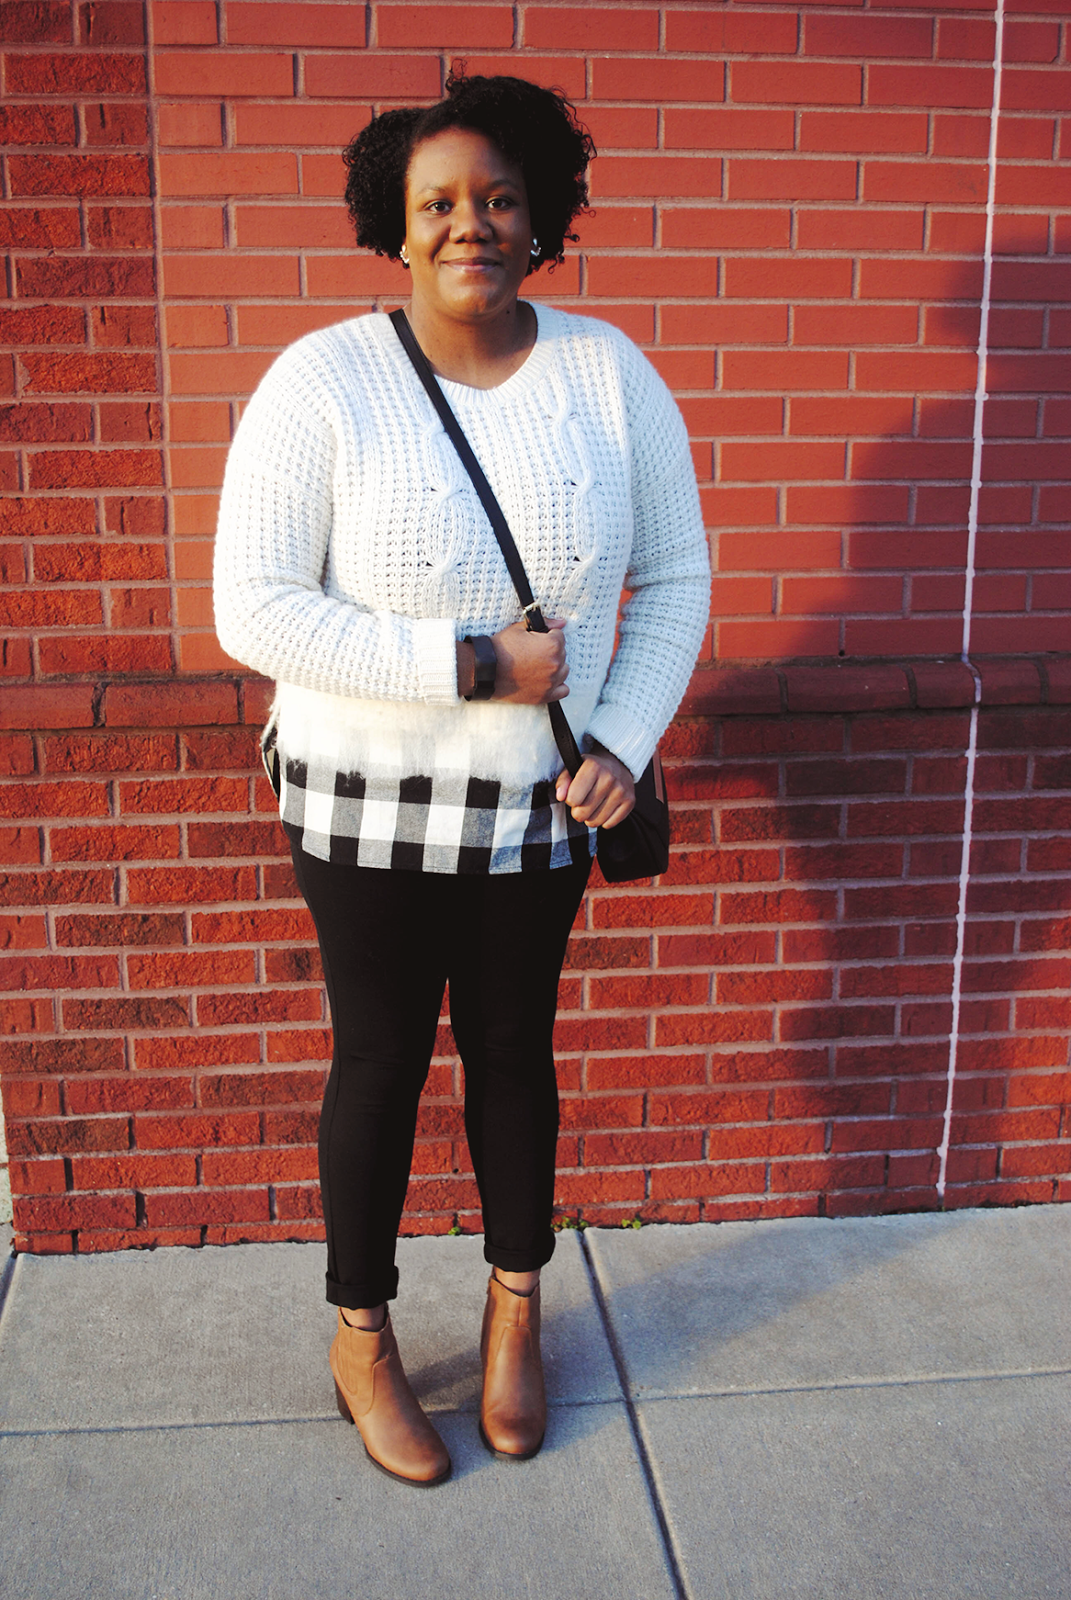 An outfit inspiration post featuring the Madewell Wintermix cable knit sweater, Target ear jackets, and boots from Shop Pink Blush.